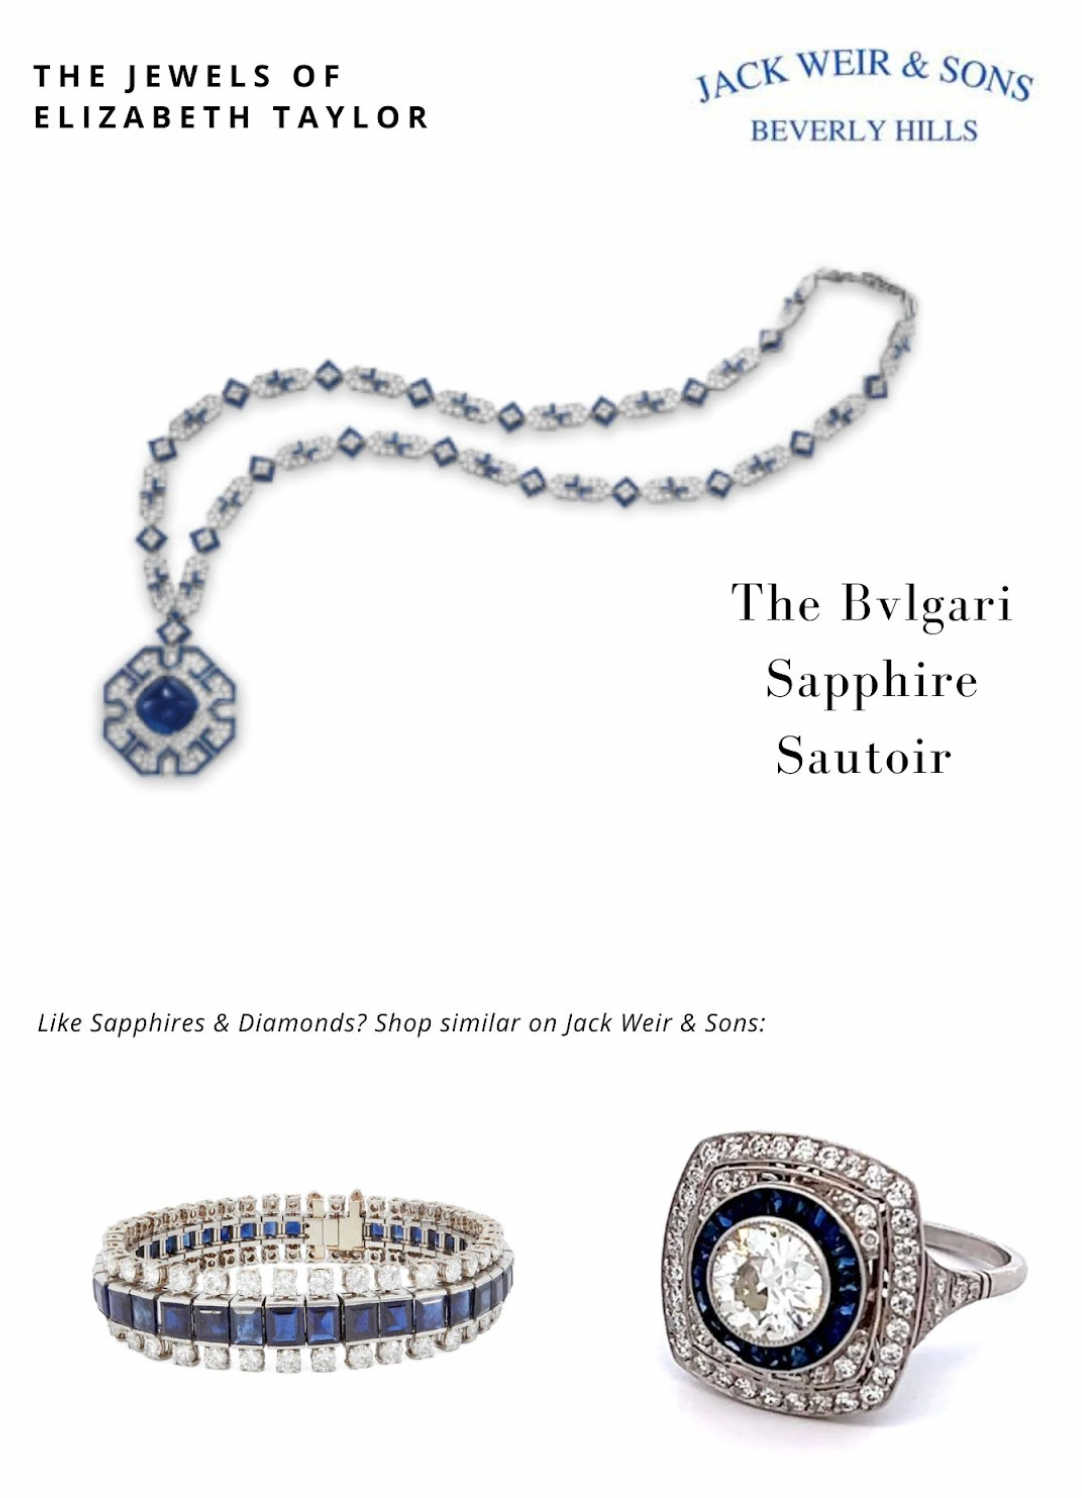 Vertical compilation on a white background featuring the iconic Bulgari Sapphire Sautoir at the top, followed by two pieces of diamond and sapphire jewelry below it.